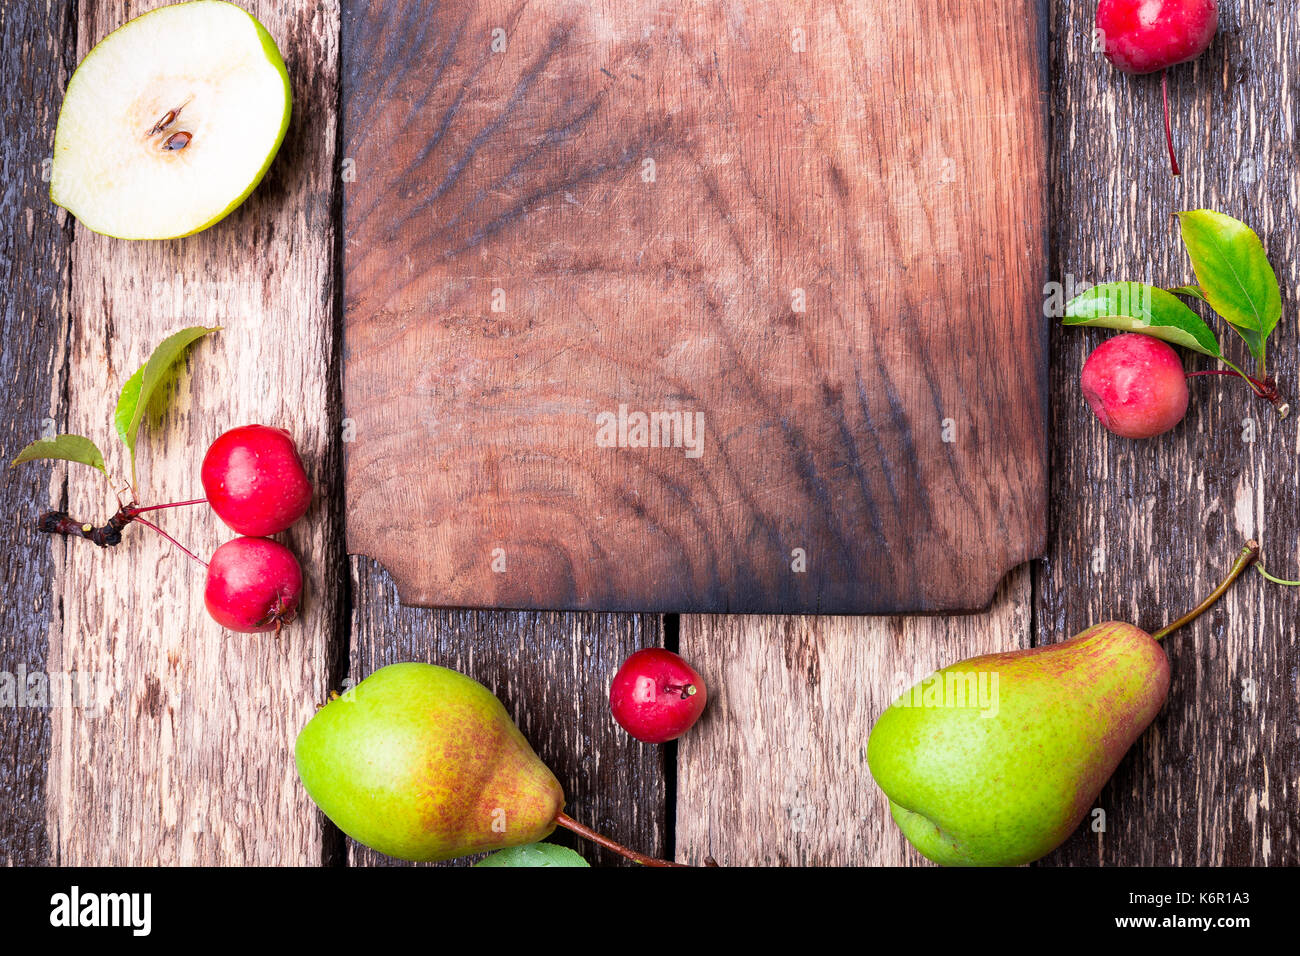 Pear and small apple around empty cutting board on wooden rustic background. Top view. Frame. Autumn harvest. Copy space Stock Photo